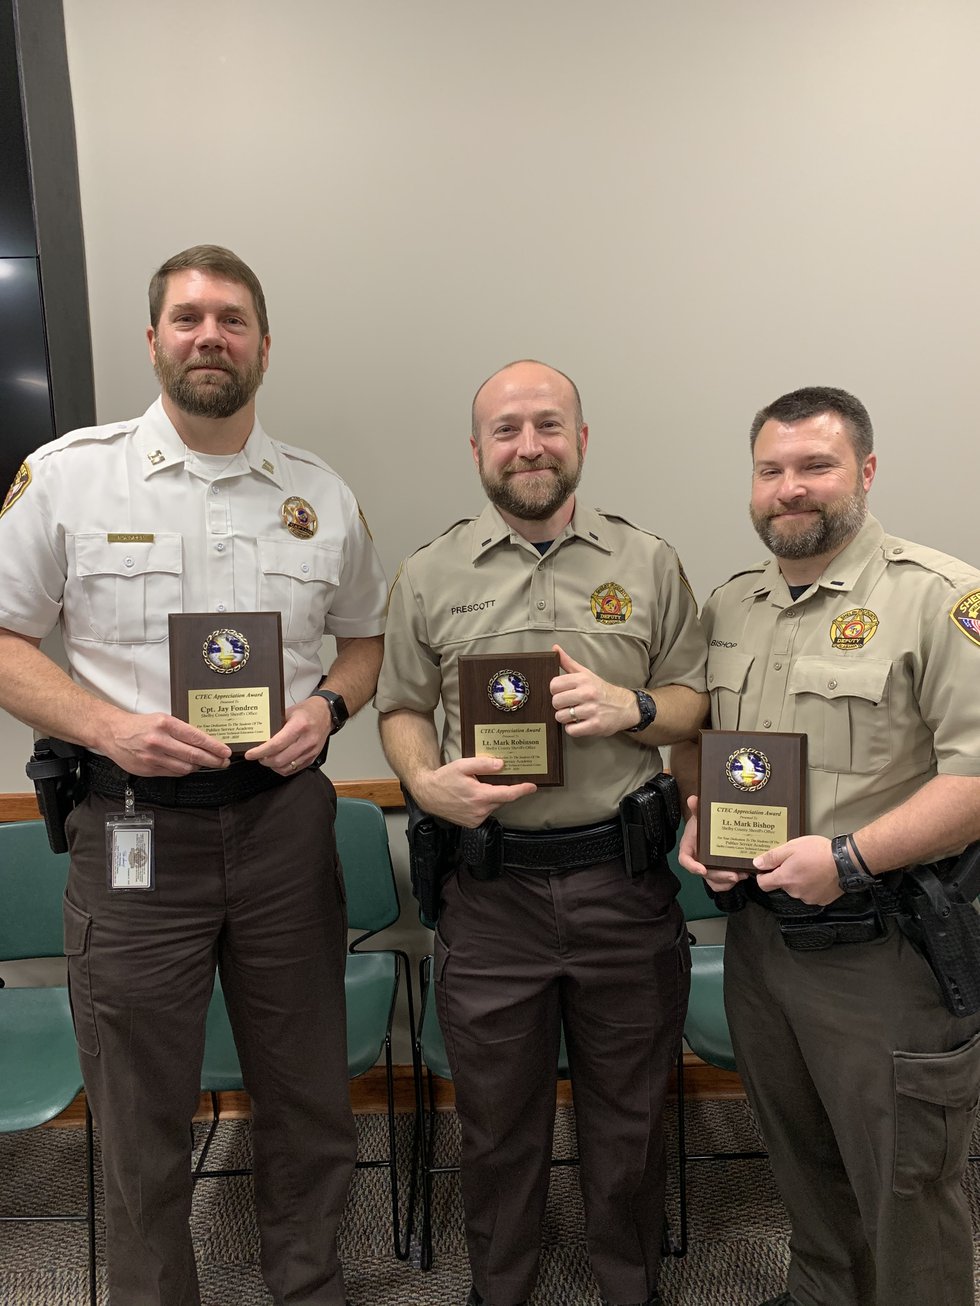 Sheriff's Office employees receive awards from CTEC students.